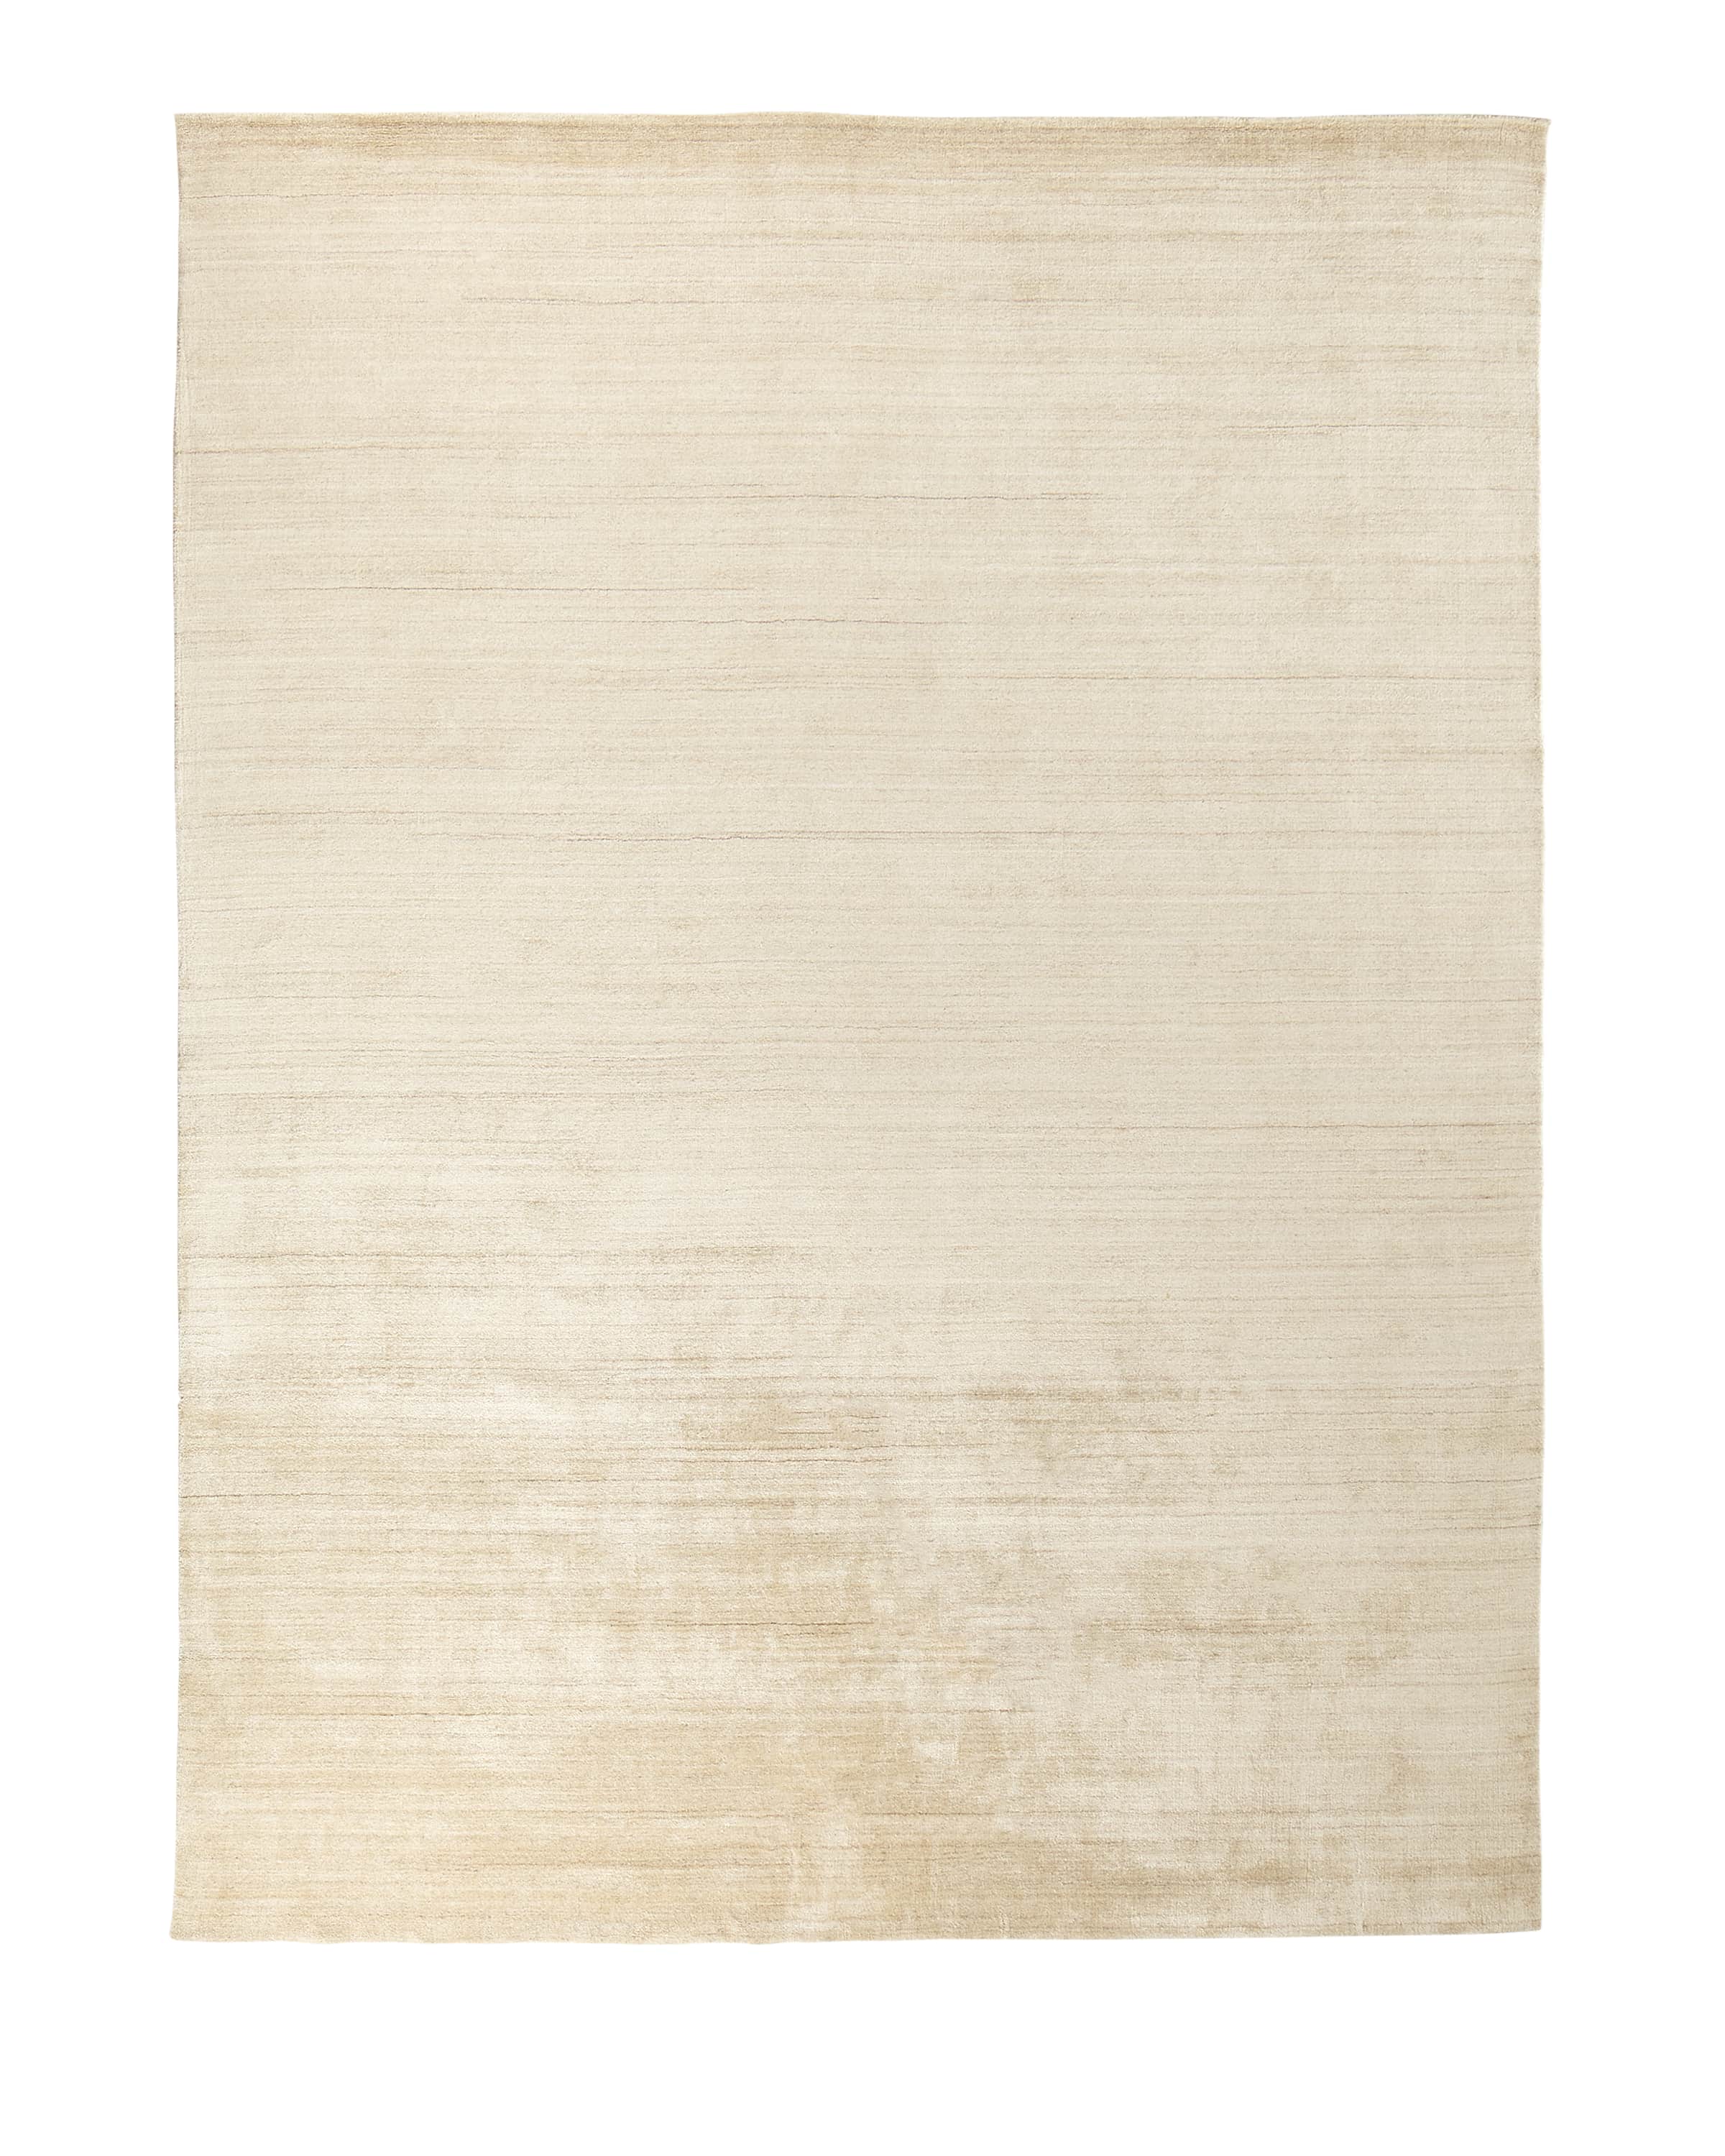 Exquisite Rugs Thames Rug, 8' x 10'